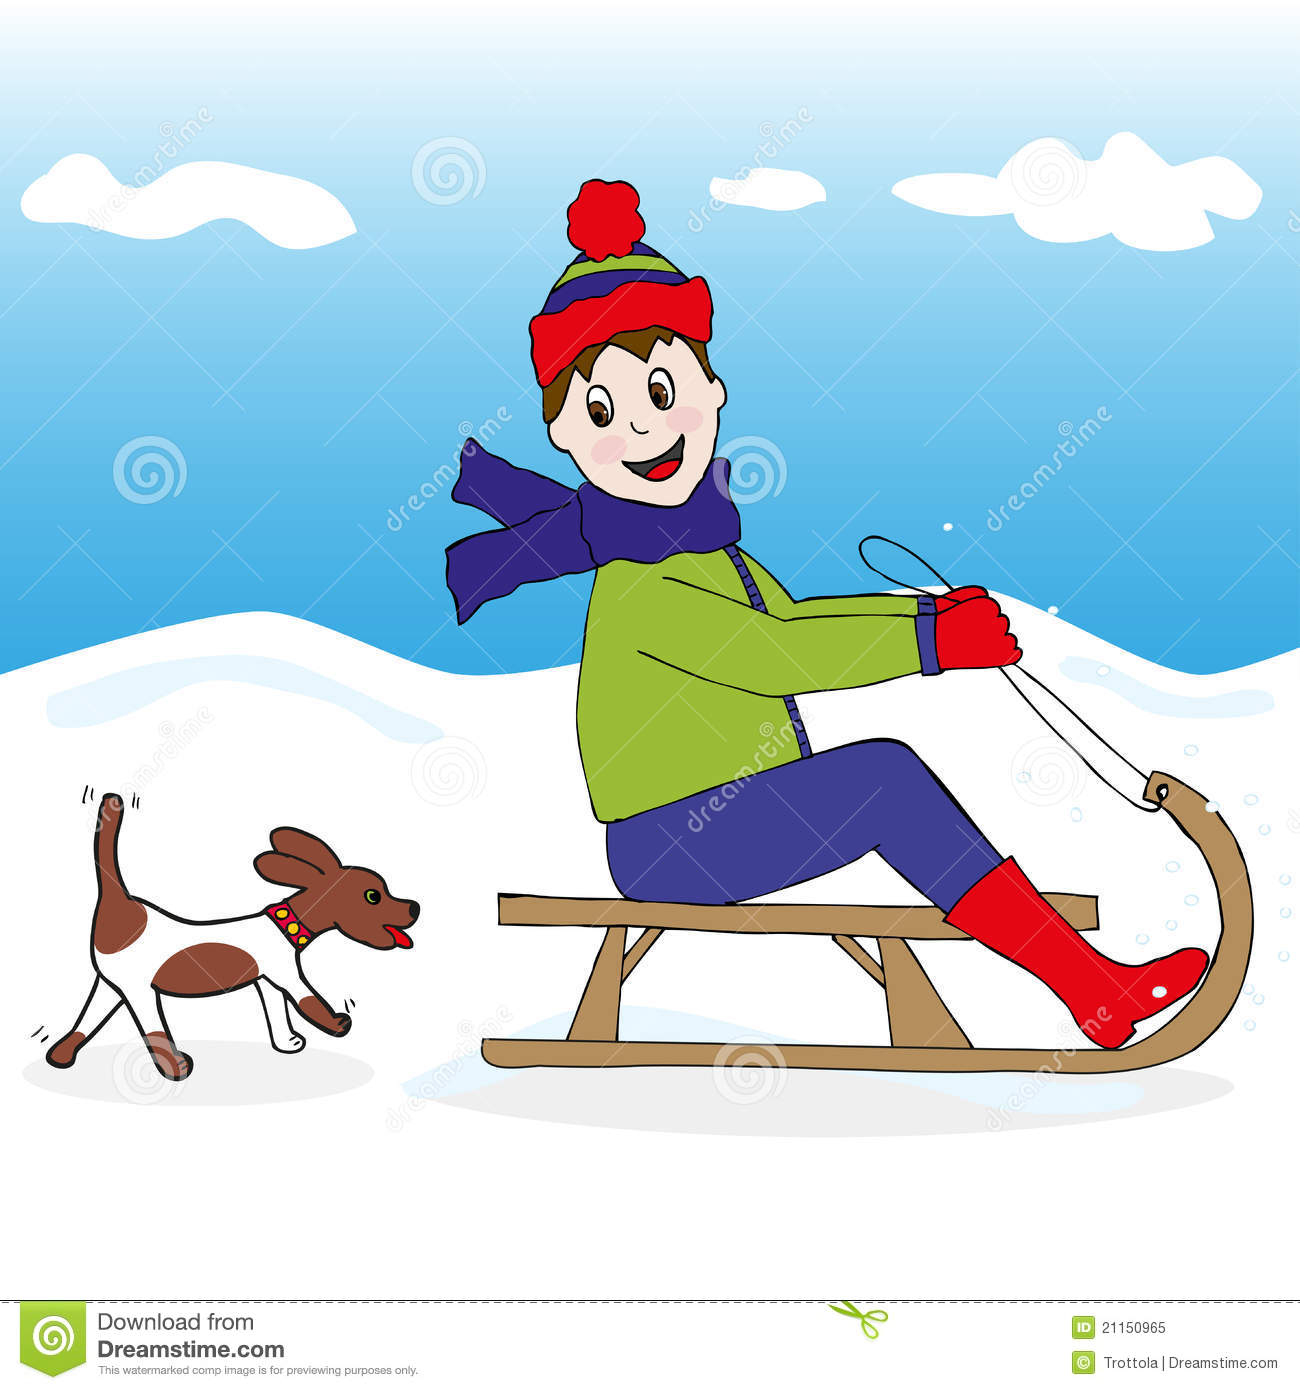 Kids Playing In Snow Clipart Child And Dog On Snow